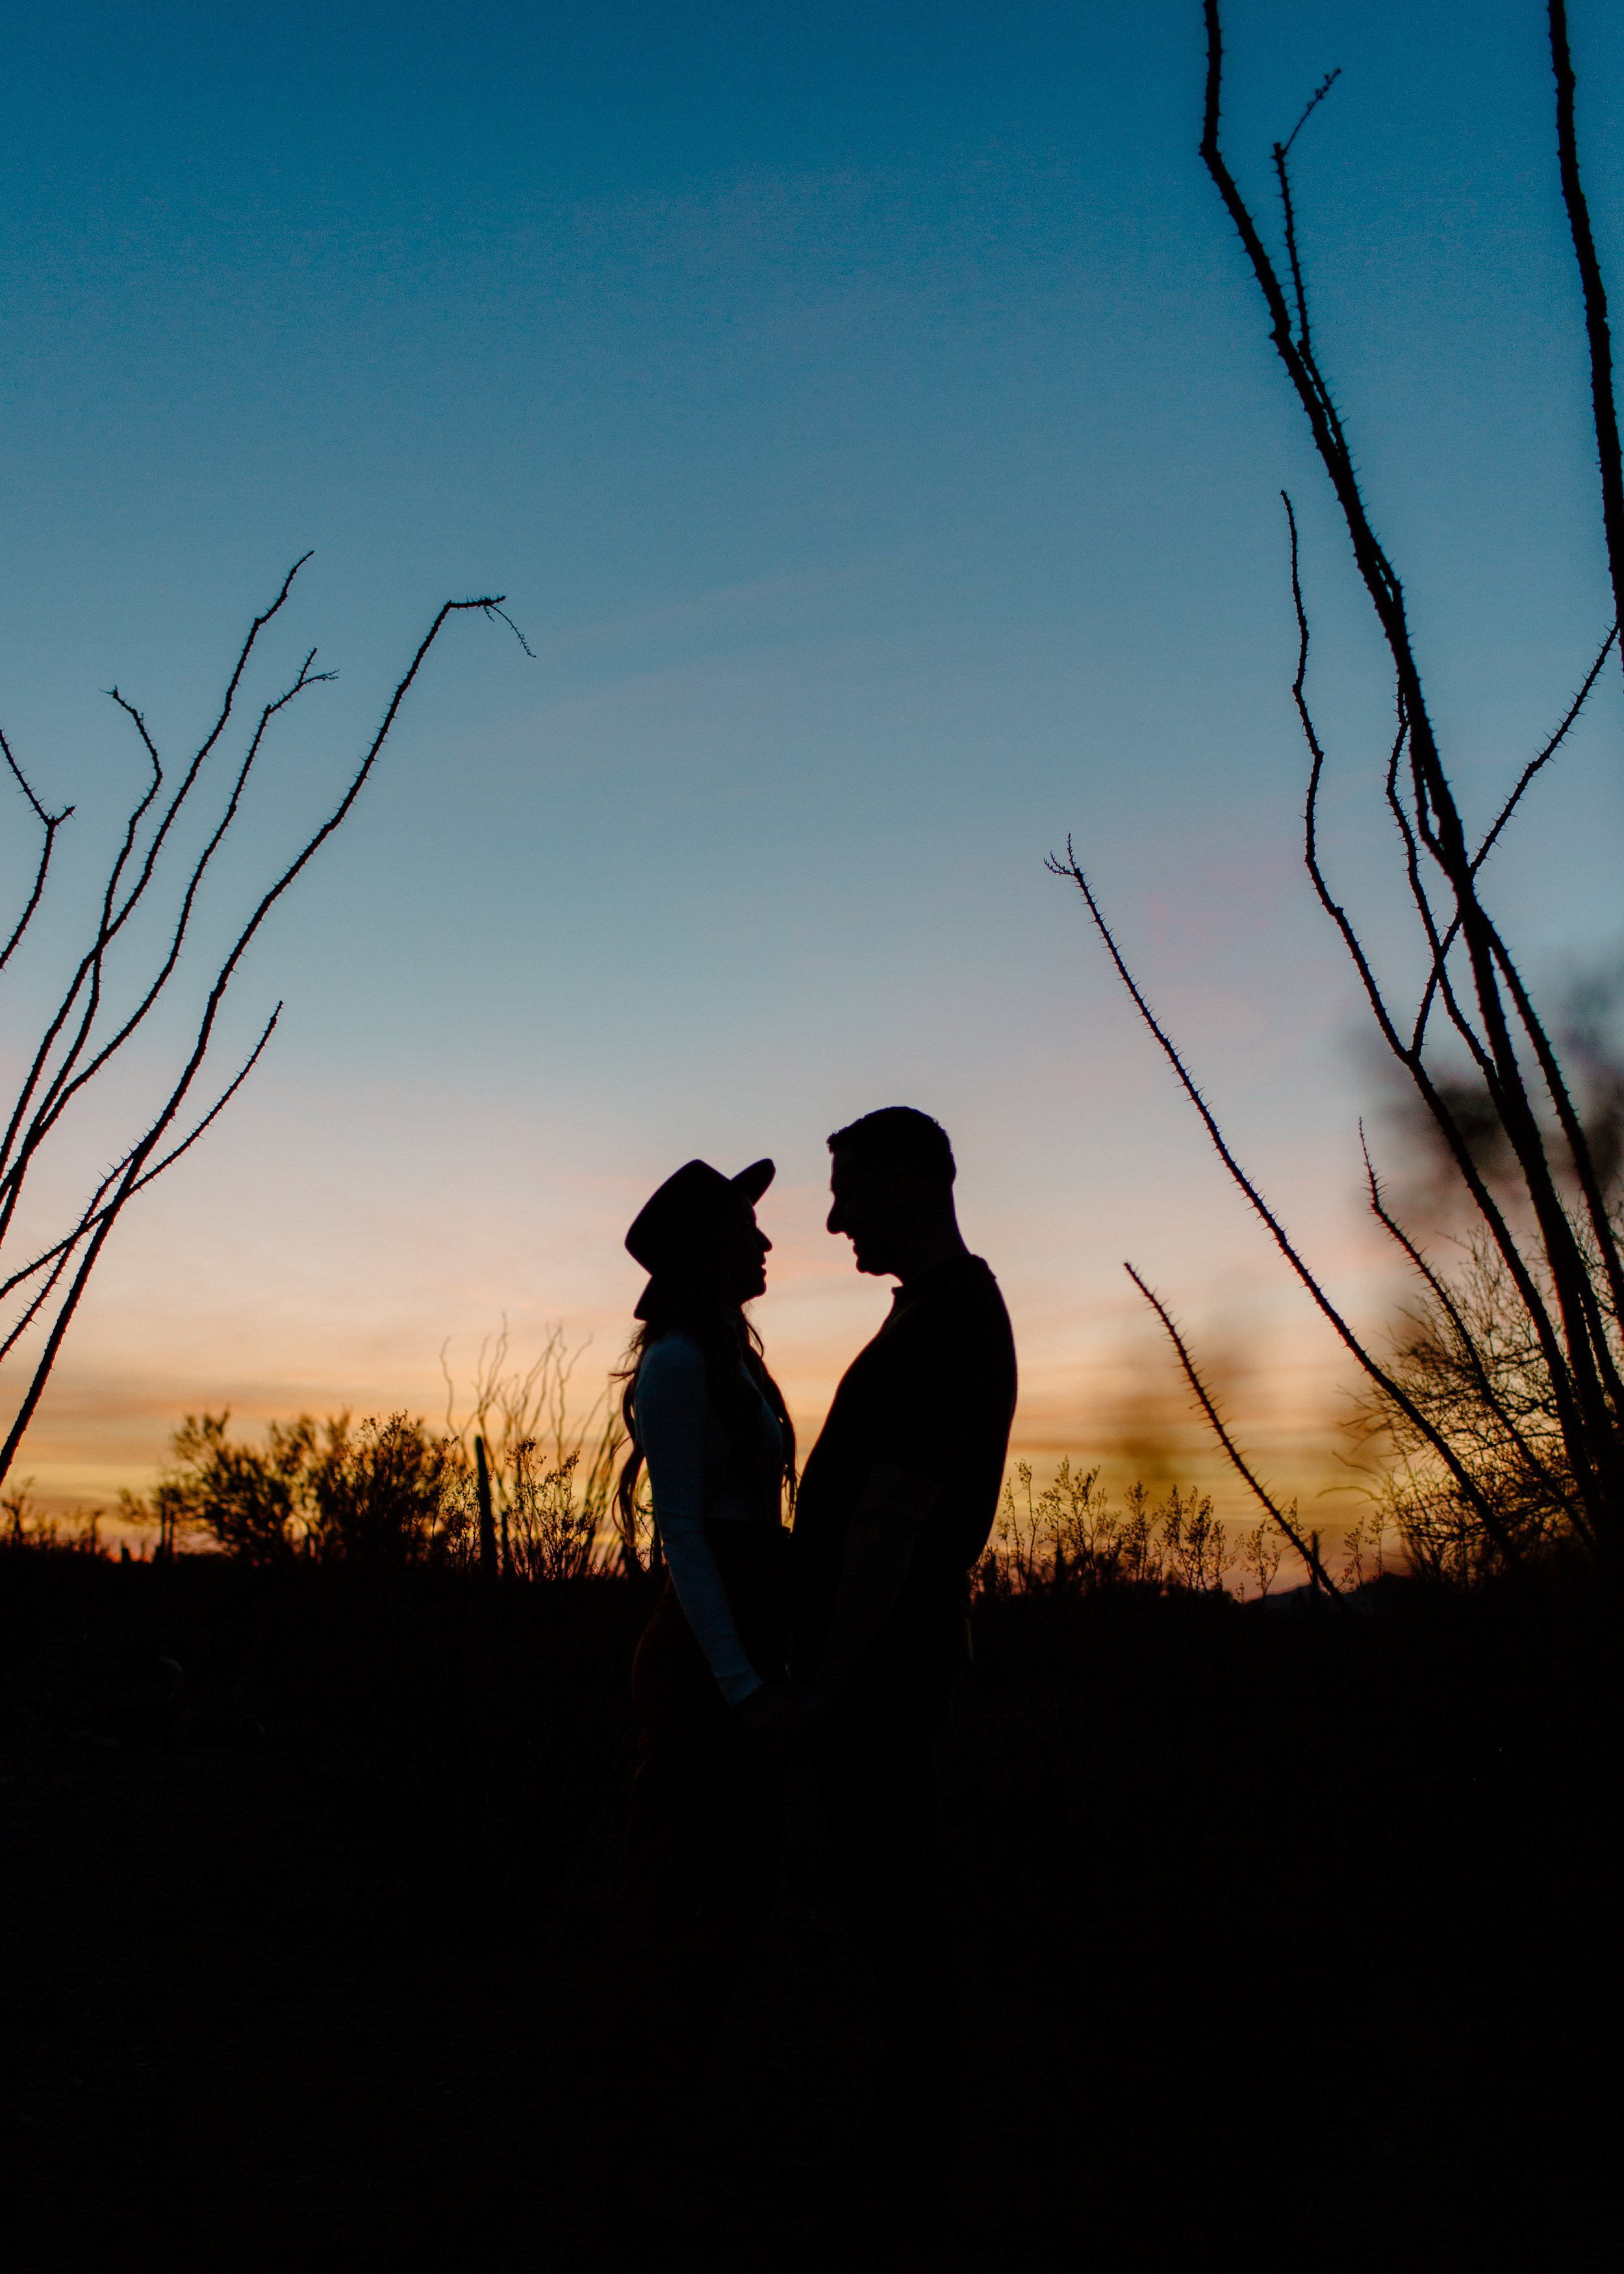  Silhouette of a couple together in front of a sunset with ocotillo cactus in Tucson Arizona 